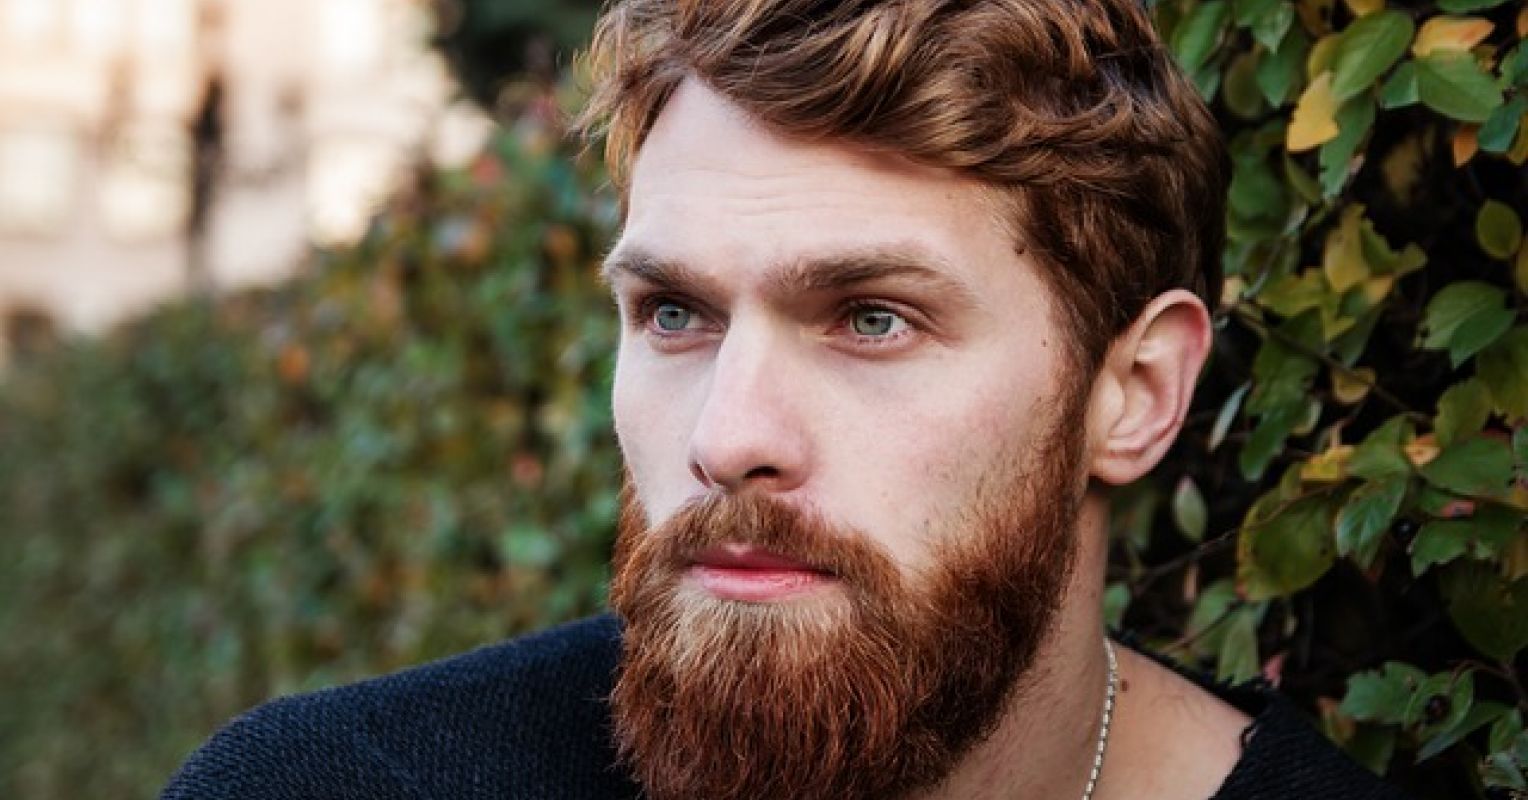 What Does Having a Beard Say About a Man? | Psychology Today